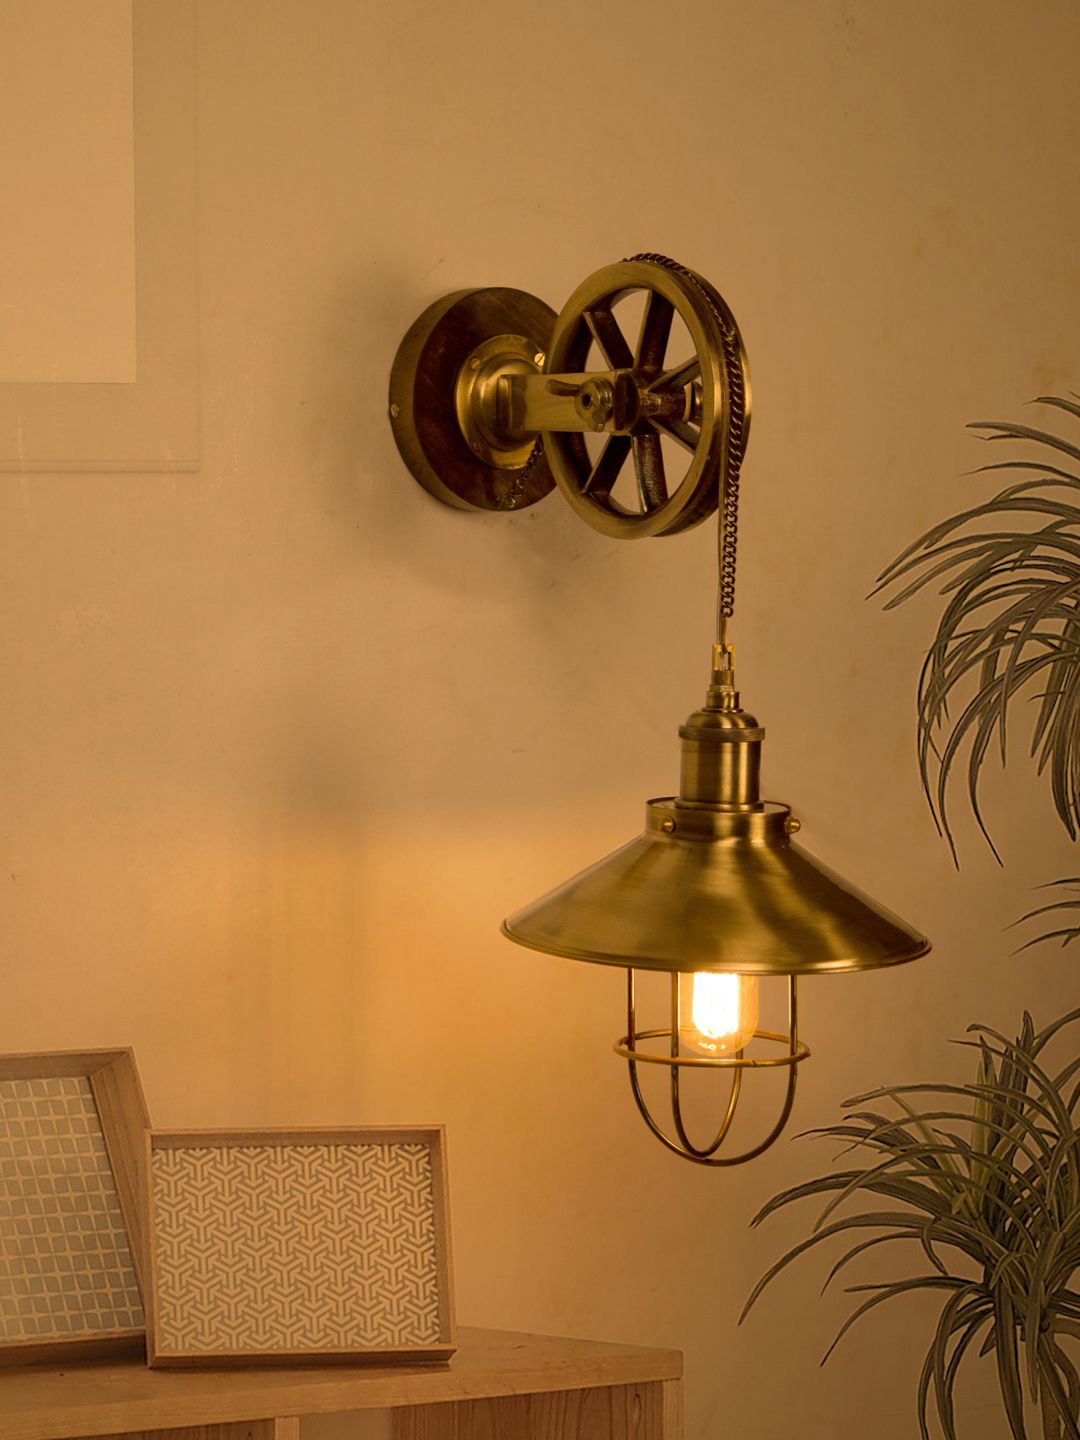 Fos Lighting Antique Gold-Toned Industrial Antique Barn Light Price in India